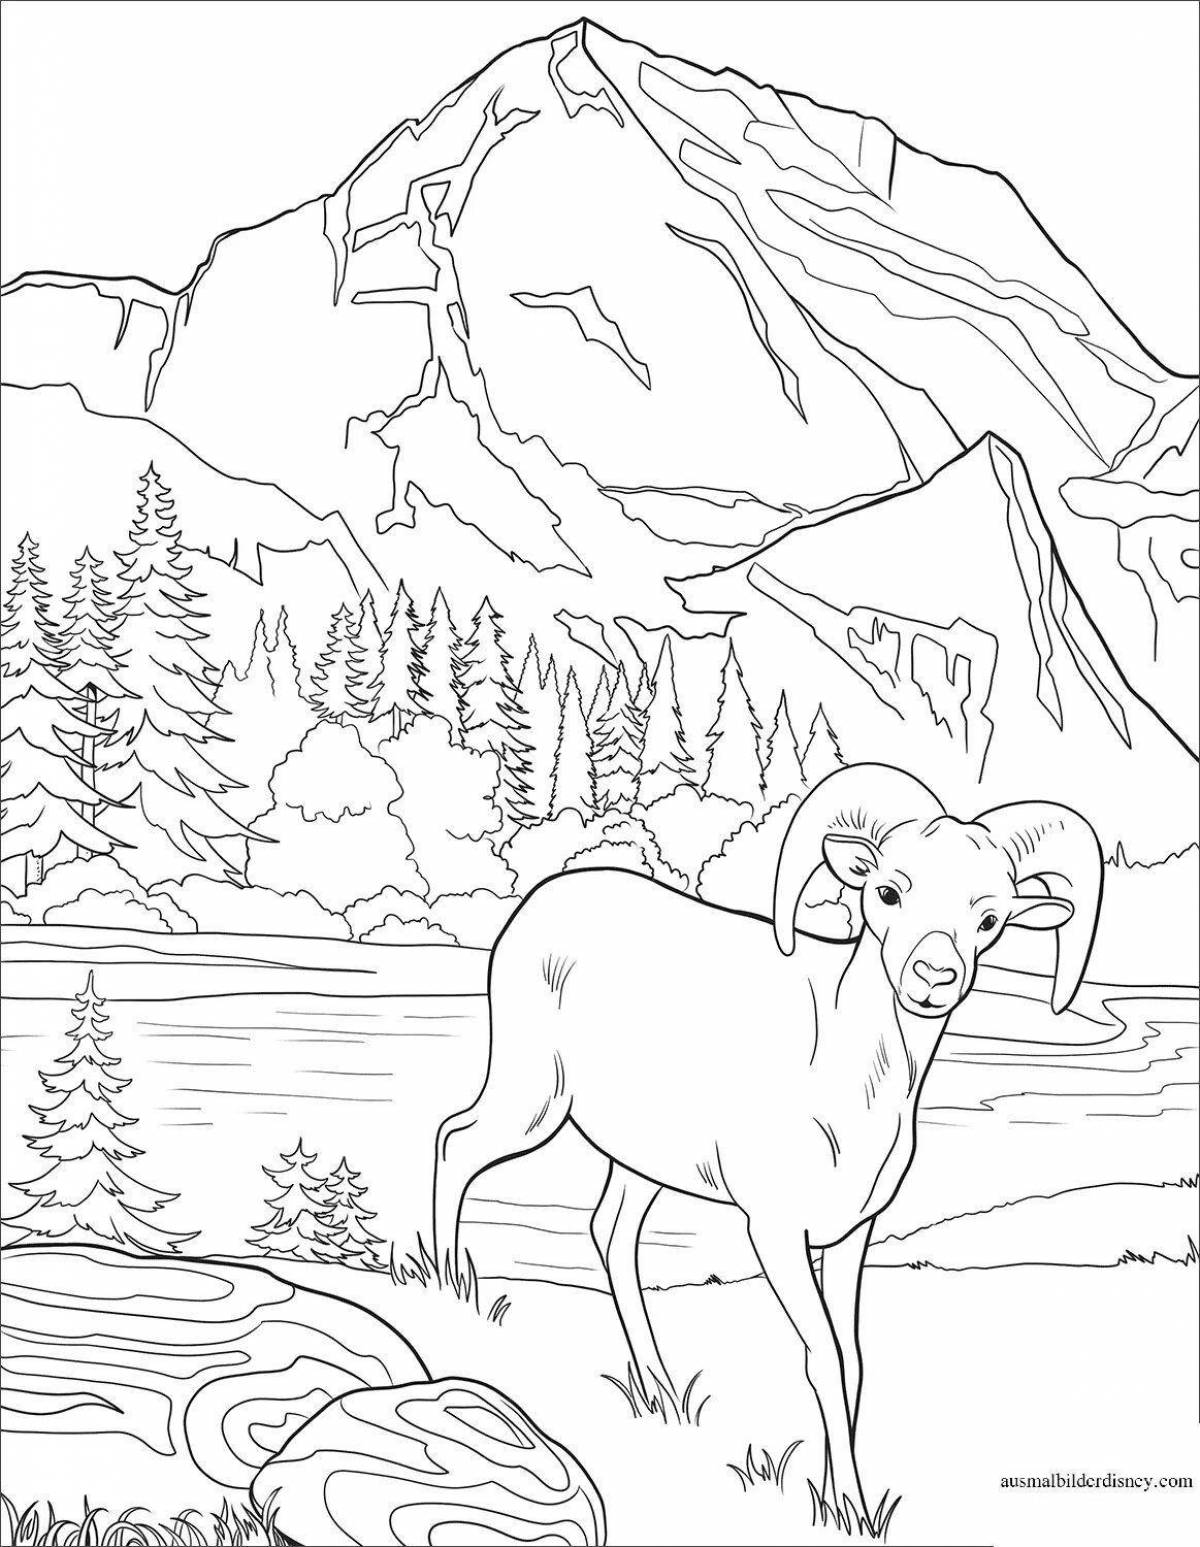 Kazakhstan's radiant nature coloring pages for children